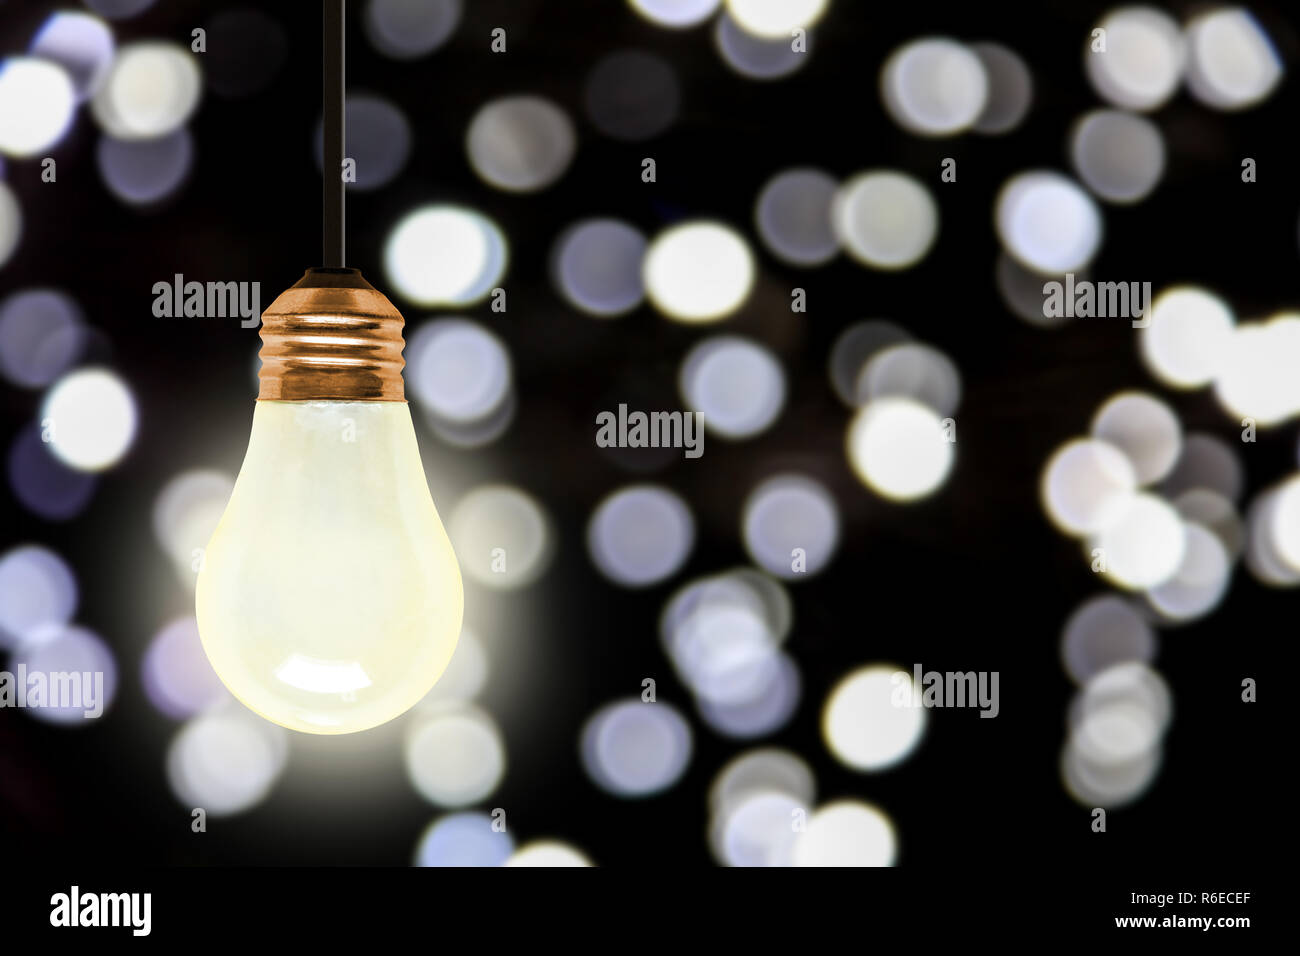 Illuminating light bulb hanging with colorful blurred Christmas lights bokeh effect and copy space. Stock Photo